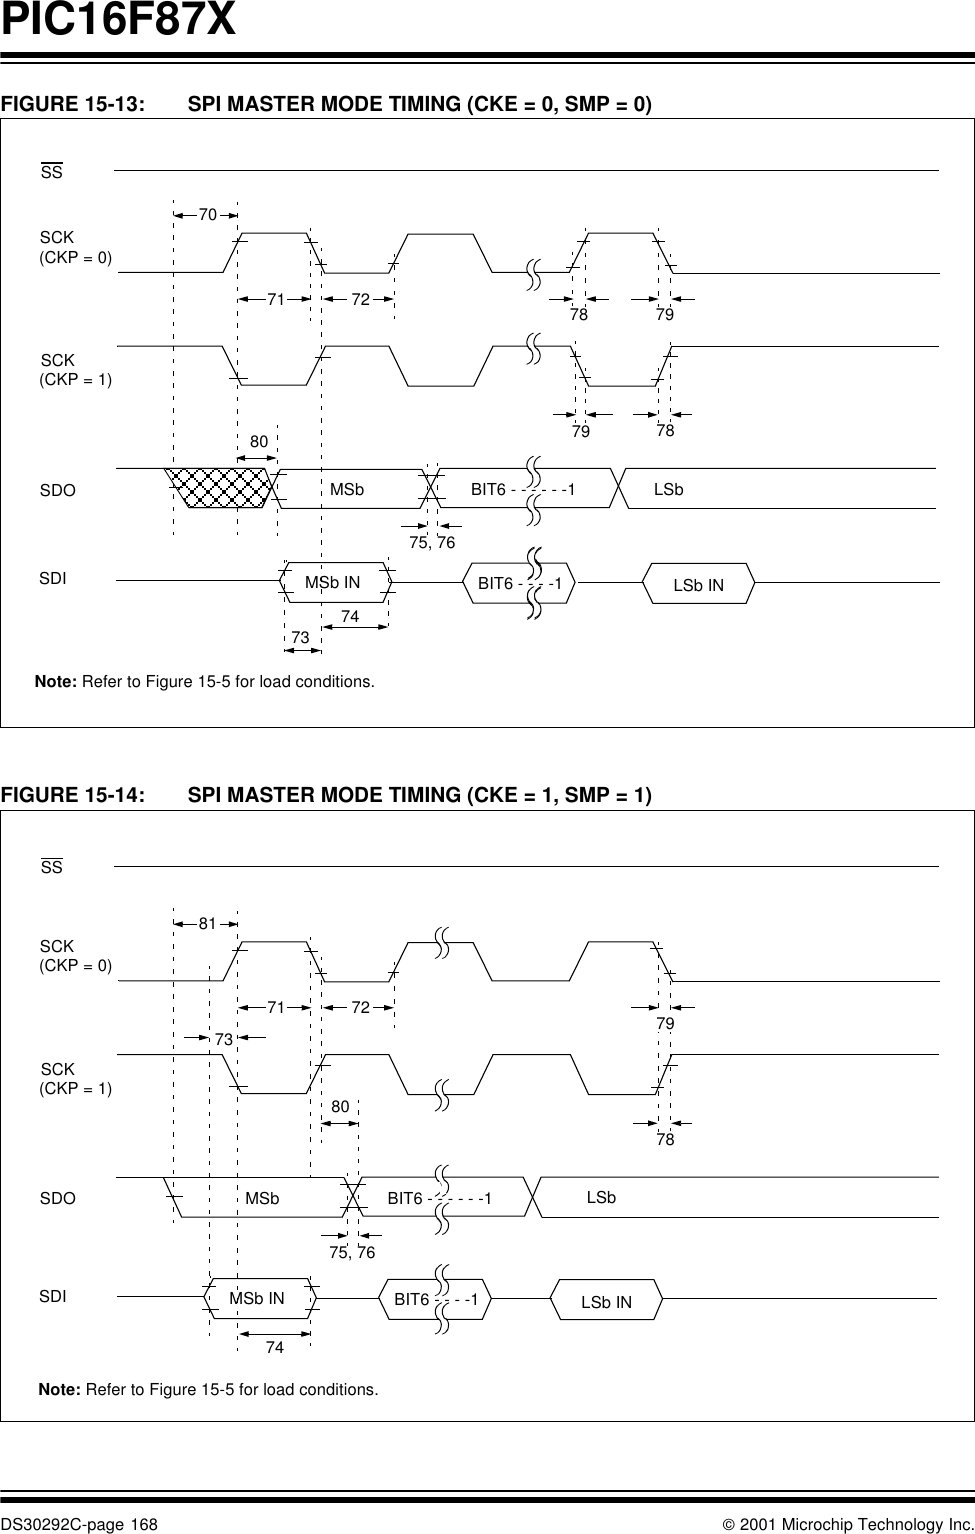 PIC16F87XDS30292C-page 168  2001 Microchip Technology Inc.FIGURE 15-13: SPI MASTER MODE TIMING (CKE = 0, SMP = 0)FIGURE 15-14: SPI MASTER MODE TIMING (CKE = 1, SMP = 1)SSSCK(CKP = 0)SCK(CKP = 1)SDOSDI7071 72737475, 767879807978MSb LSbBIT6 - - - - - -1MSb IN LSb INBIT6 - - - -1Note: Refer to Figure 15-5 for load conditions.SSSCK(CKP = 0)SCK(CKP = 1)SDOSDI8171 727475, 767880MSb7973MSb INBIT6 - - - - - -1LSb INBIT6 - - - -1LSbNote: Refer to Figure 15-5 for load conditions.